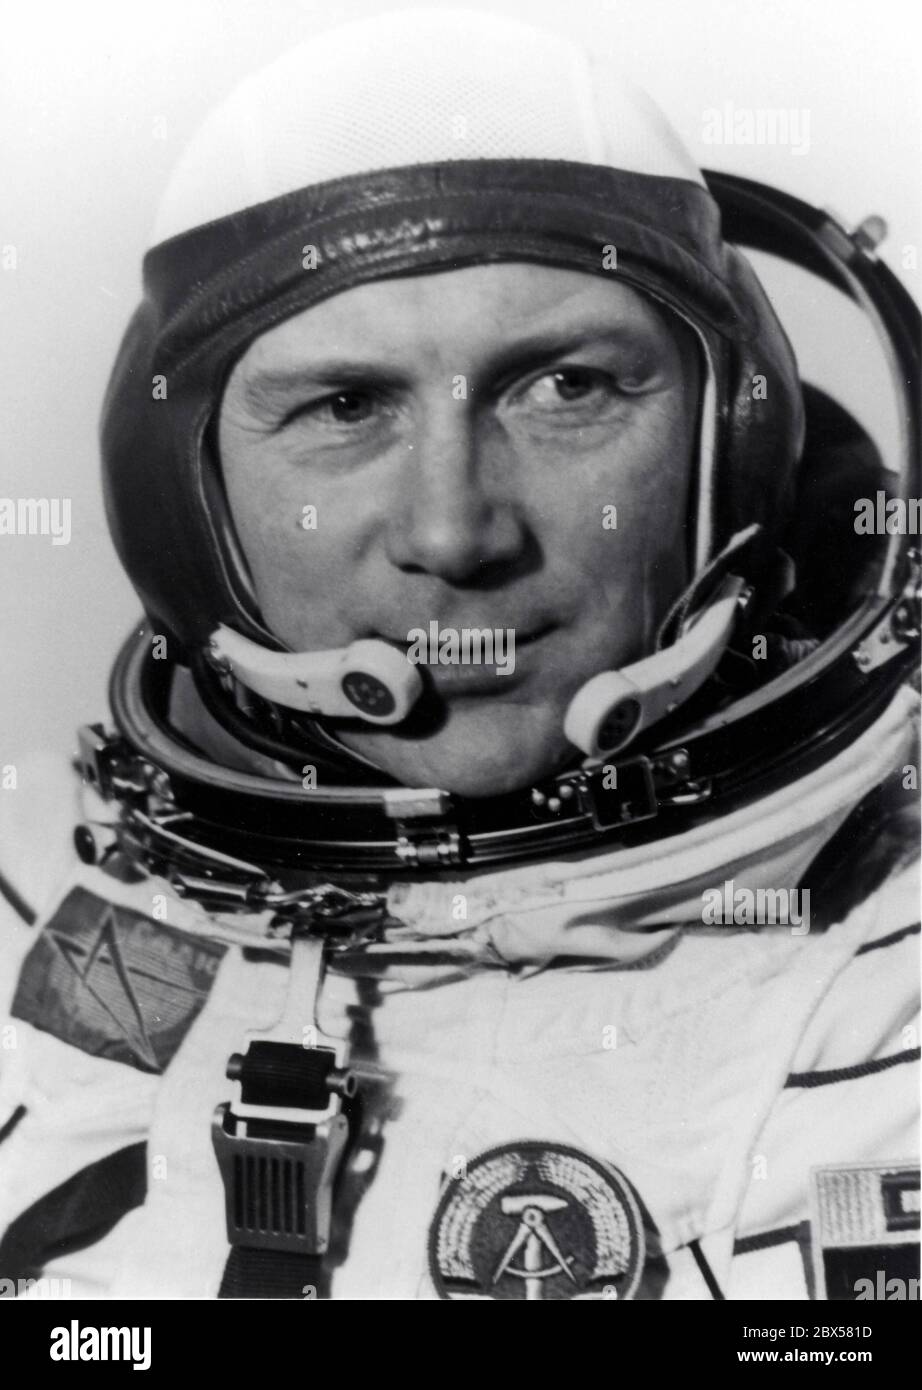 Sigmund Jaehn - * 13.02.1937, cosmonaut and Major General of the GDR People's Army. After training at the Soviet Cosmonaut Center he flies out into space as the first German together with a Soviet cosmonaut on 26 August 1978, and after a week's stay at space station Salut-6  lands with the Soyuz-31 in the Kazakh steppe on September 2, 1978. Photo from  August 1978 in a spacesuit at the Baikonur Cosmodrome. Undated photo from 1978. Stock Photo